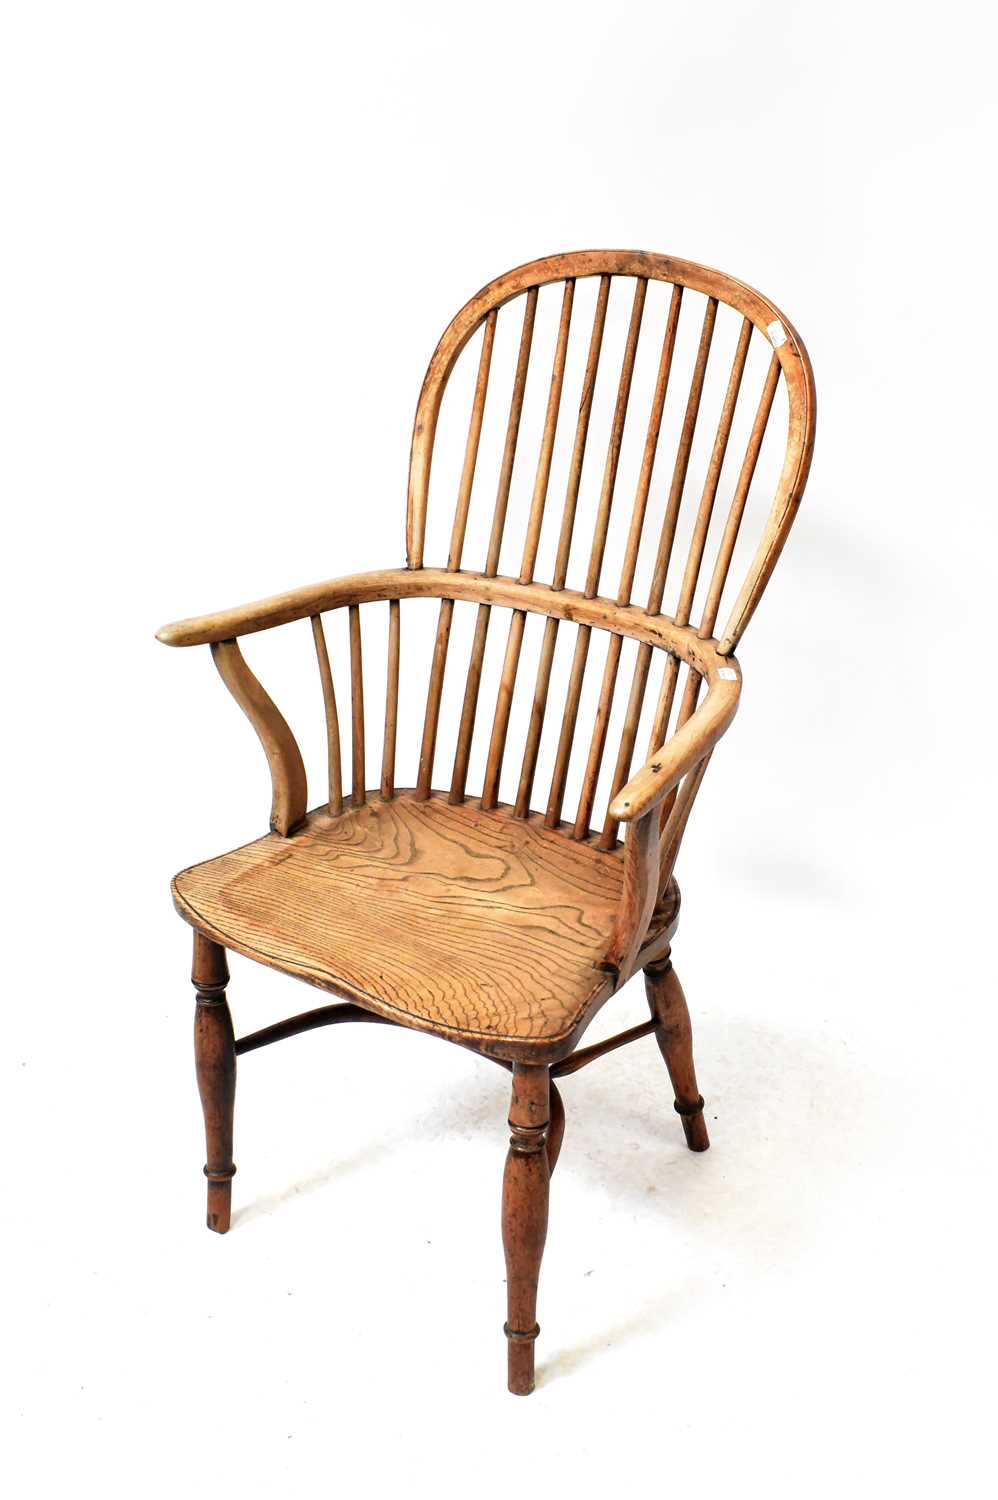 A Georgian yew wood Windsor chair with comb back and crinoline stretcher, height 103cm.Condition